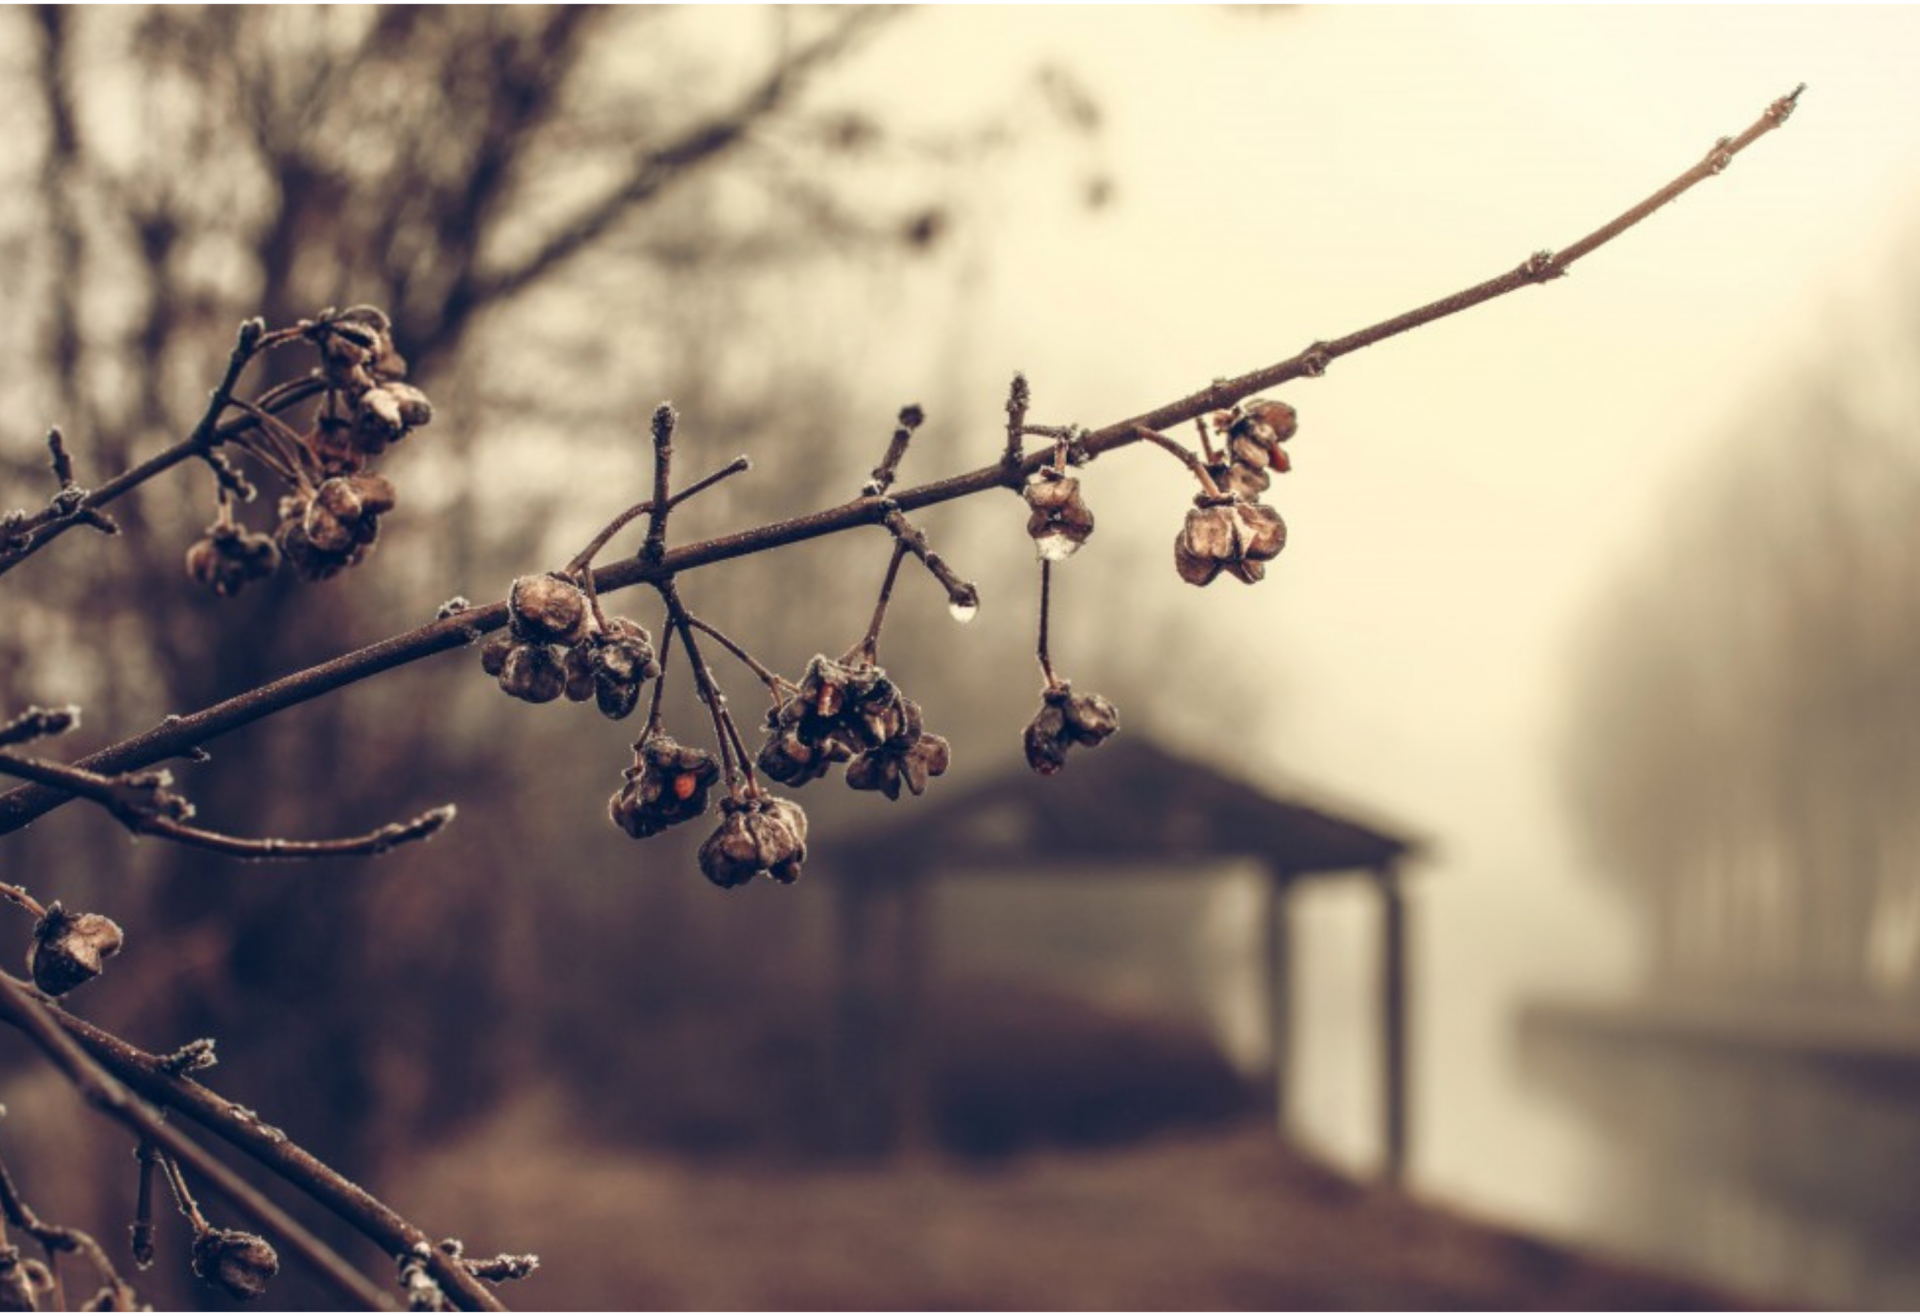 Water drops on buds dangling from branches on a rainy and foggy day